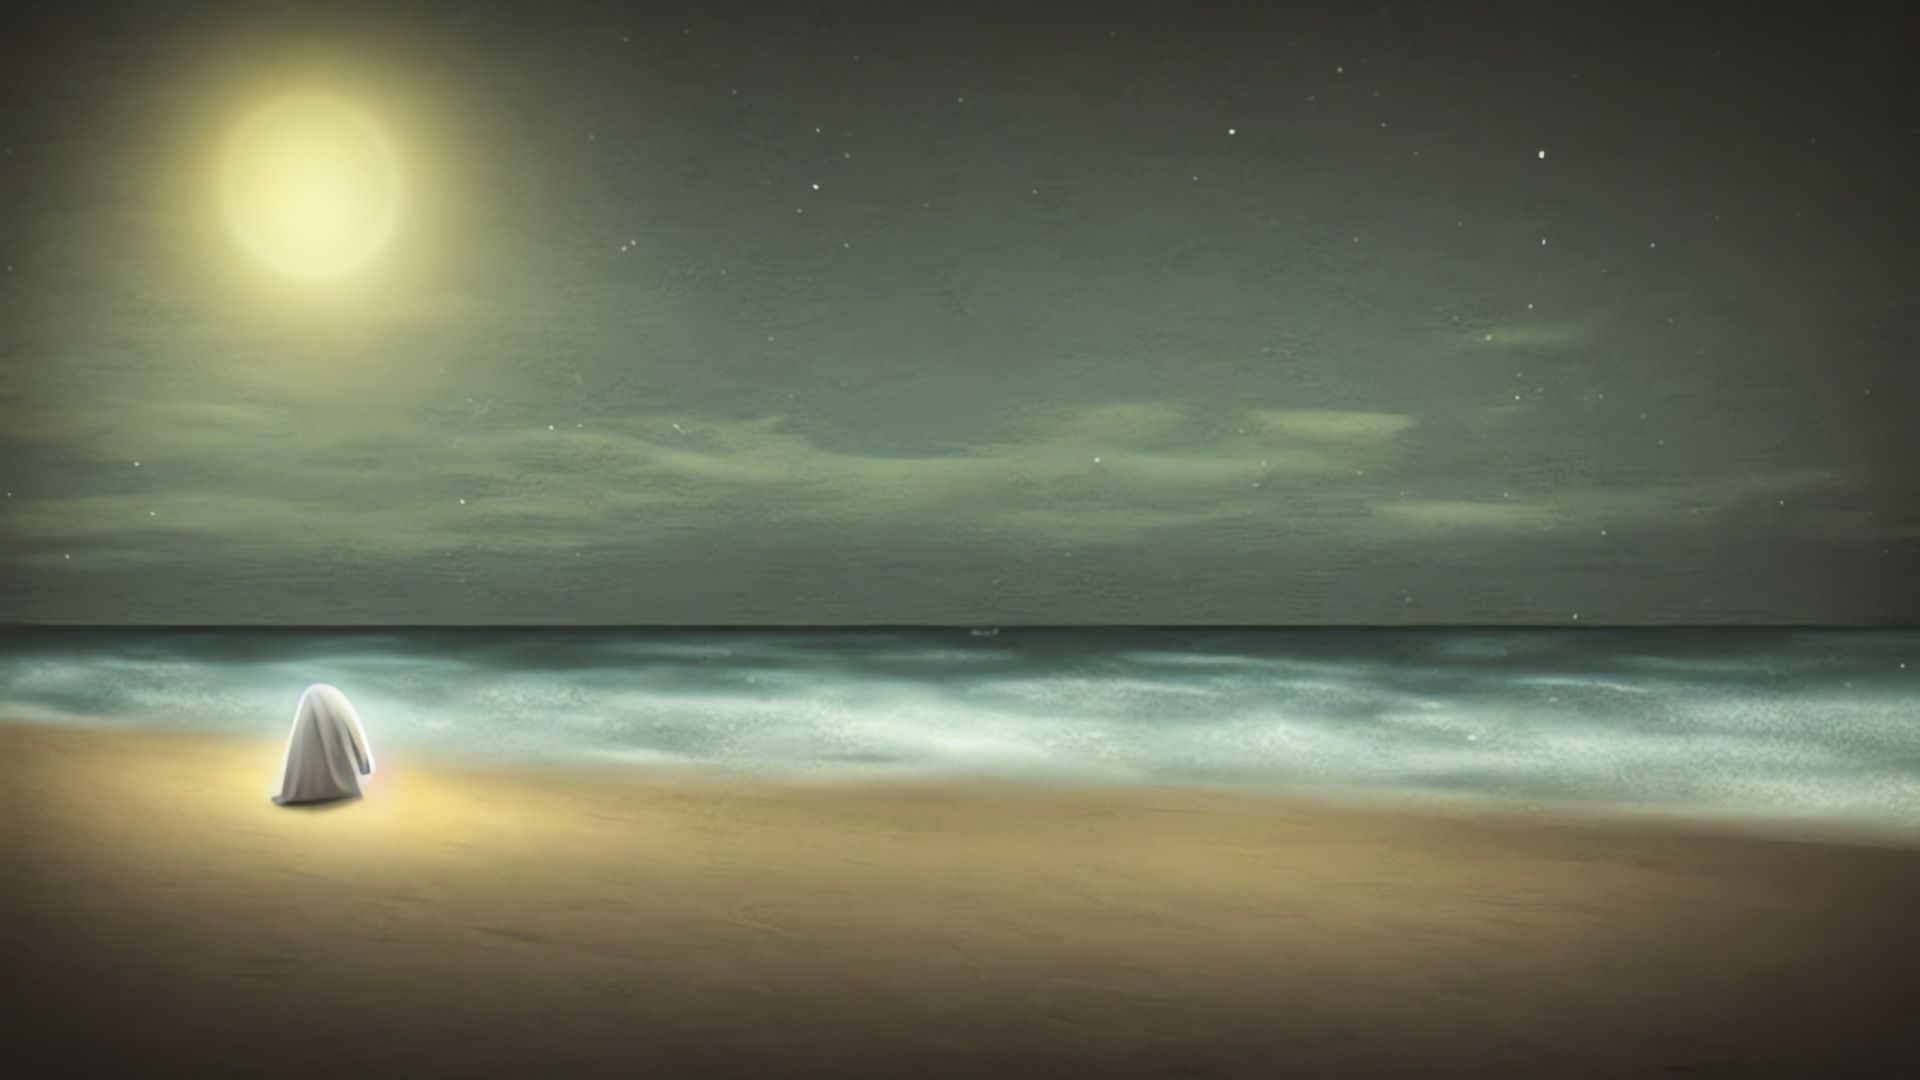 Artificial intelligence-generated image of a ghost sitting on the beach at night.